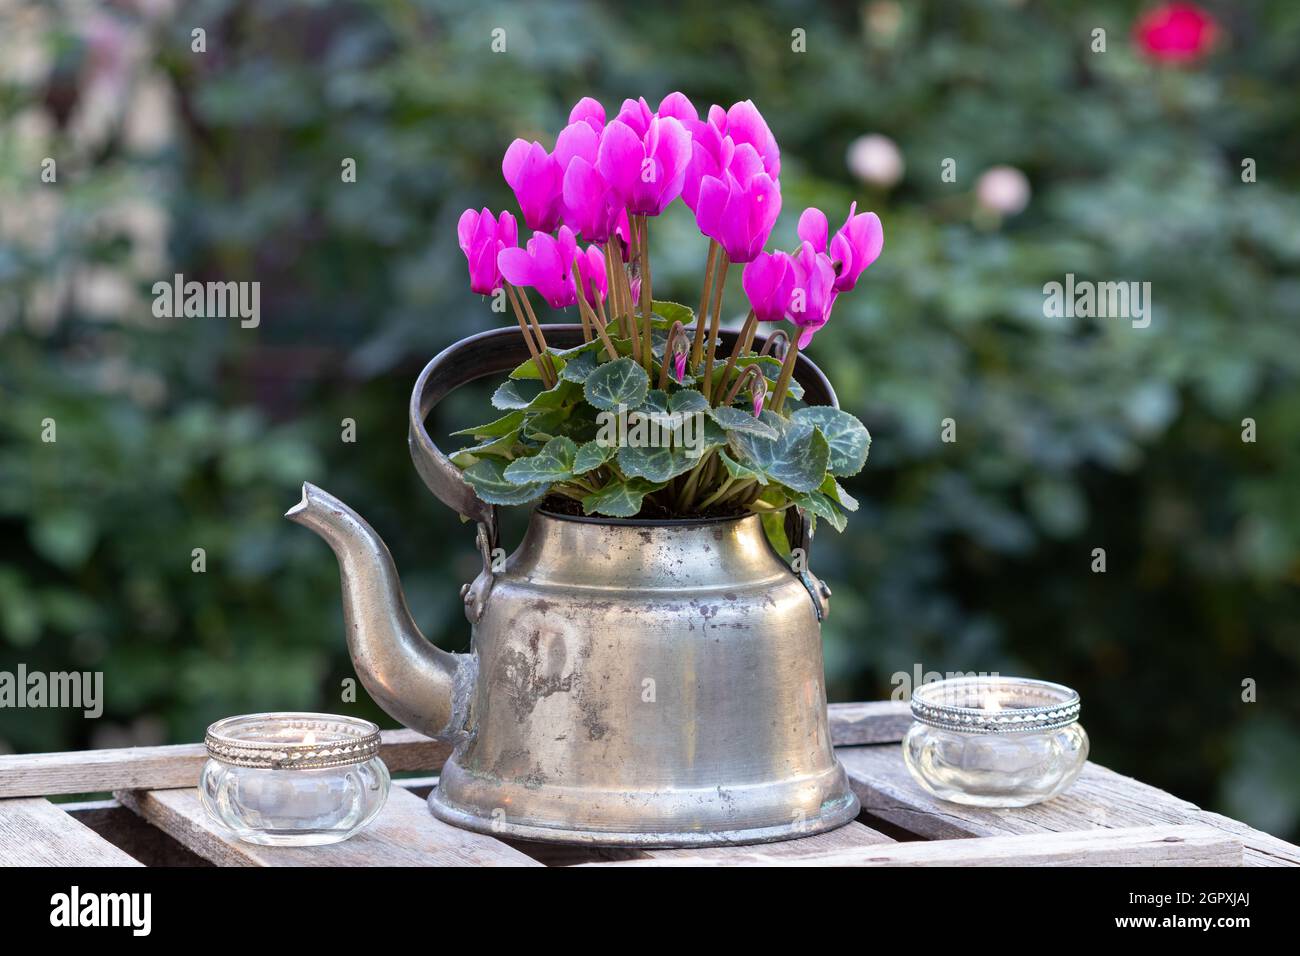 pink cyclamen flower in vintage tea pot as floral decoration Stock Photo